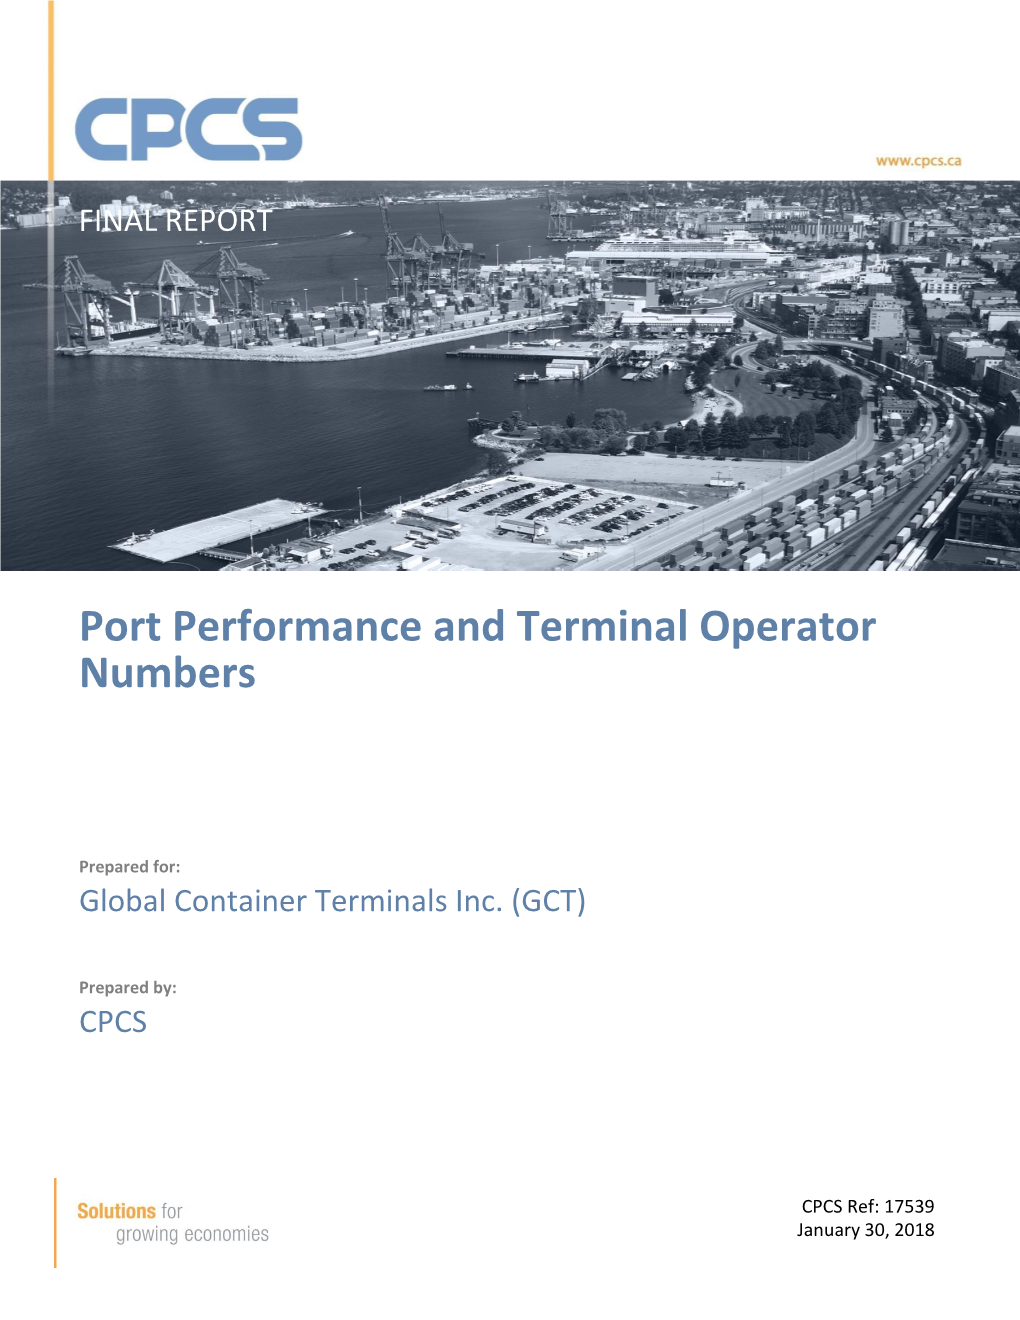 Port Performance and Terminal Operator Numbers